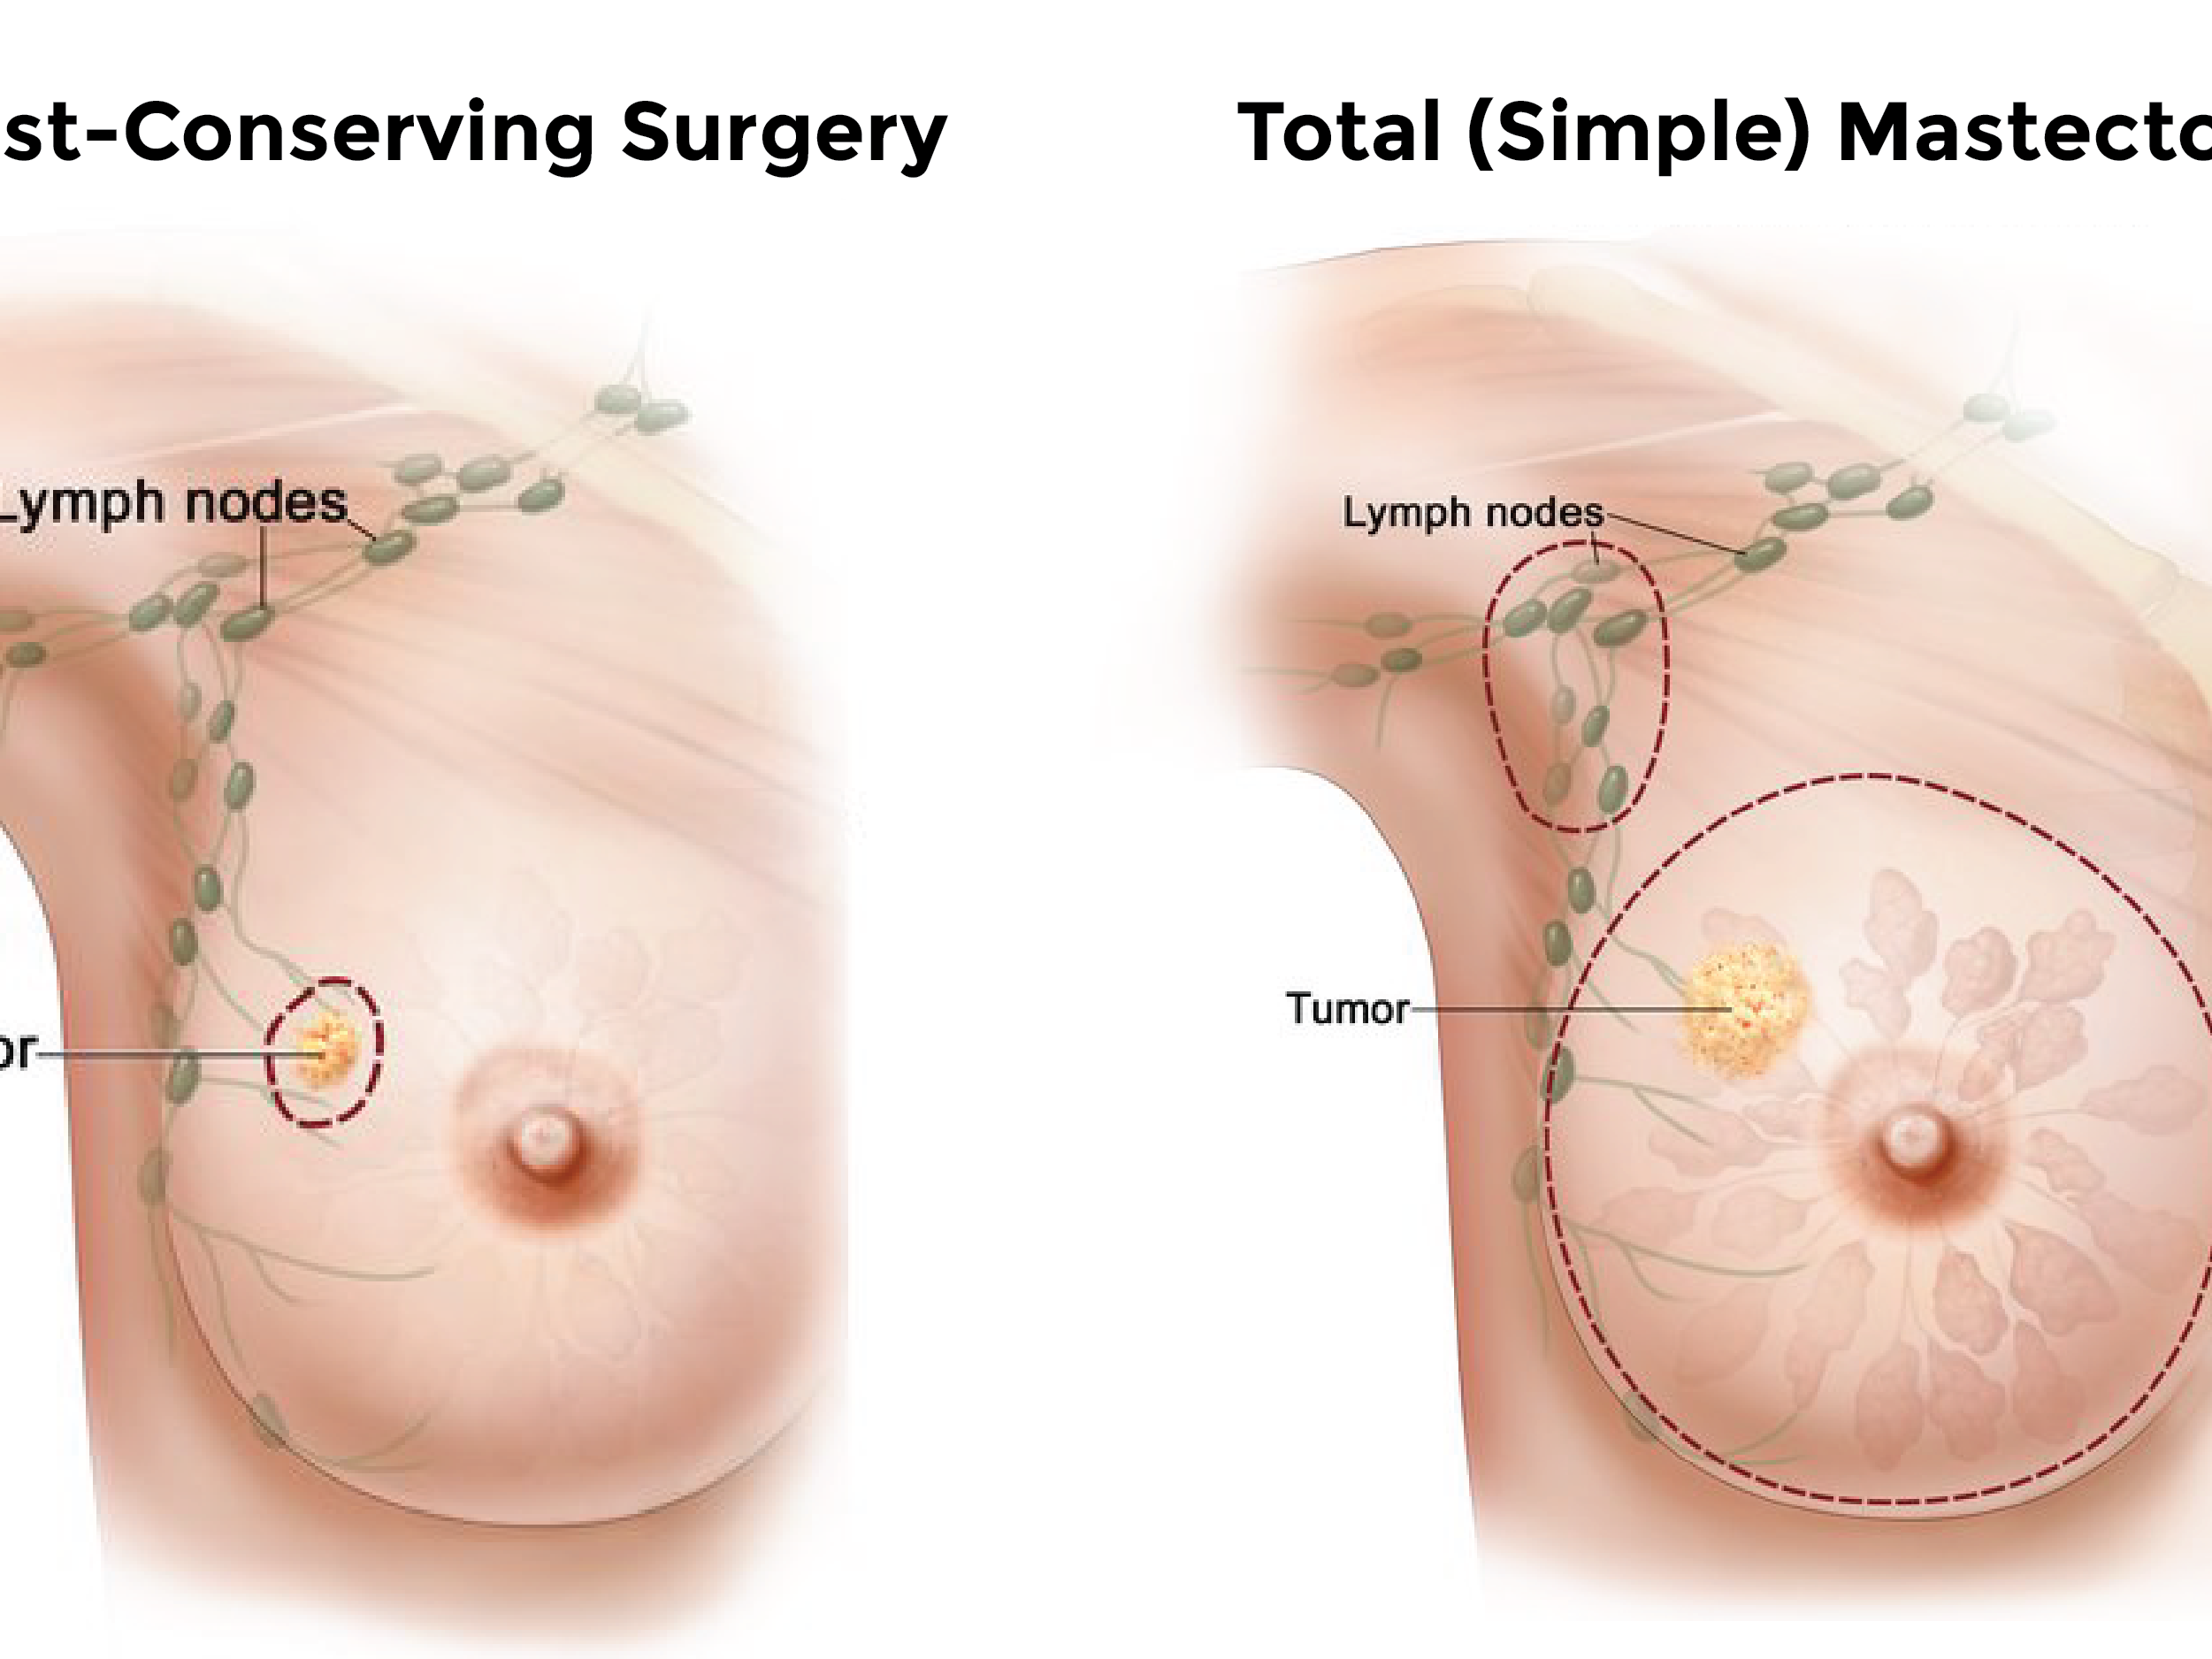 The clinical picture of the left breast at one-month post-surgery